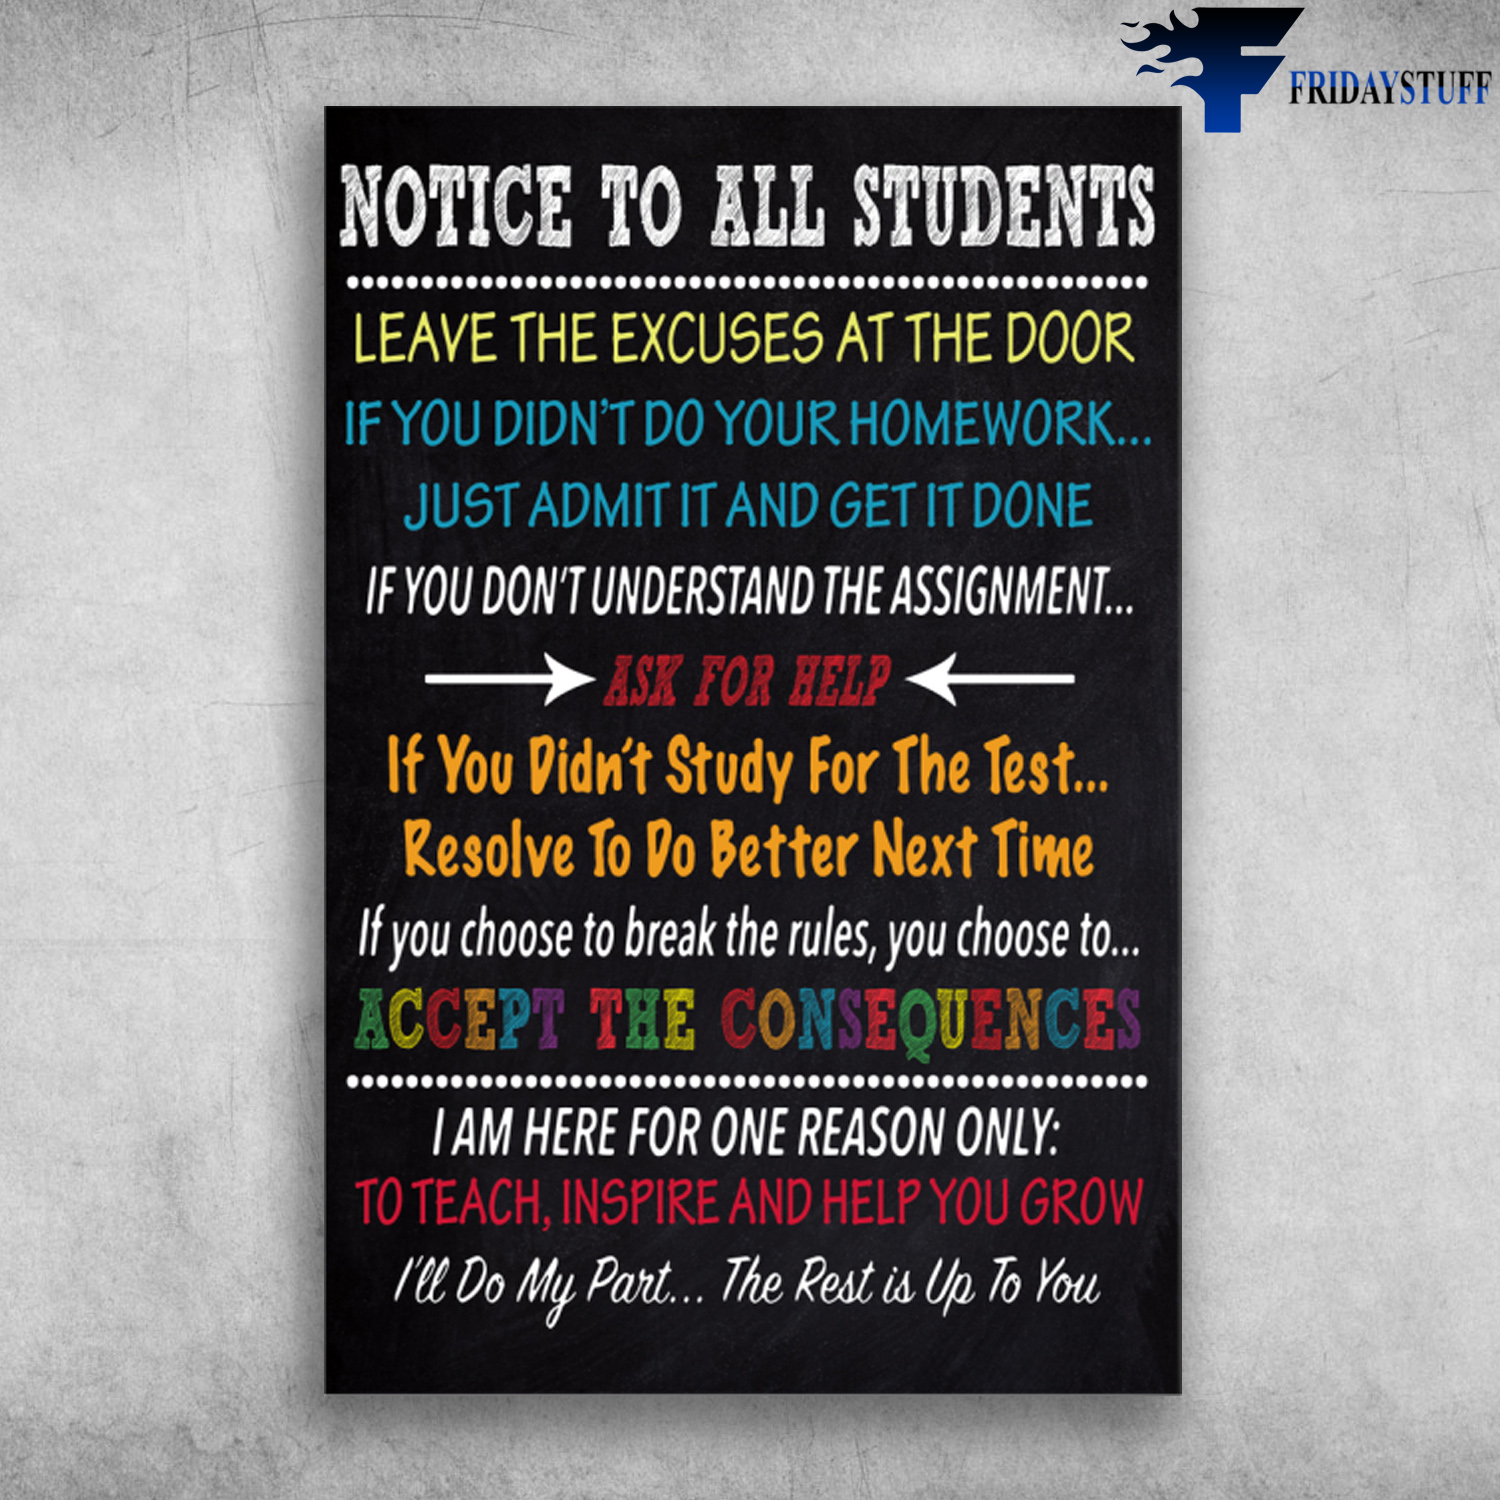 Notice TO ALl Students - Leave The Excuses At The Door, If You Didn't DO Your Homeworlk, Just Admit It And Get It Done, If You Didn't Study For The Test, Resolve To Do Better Next Time